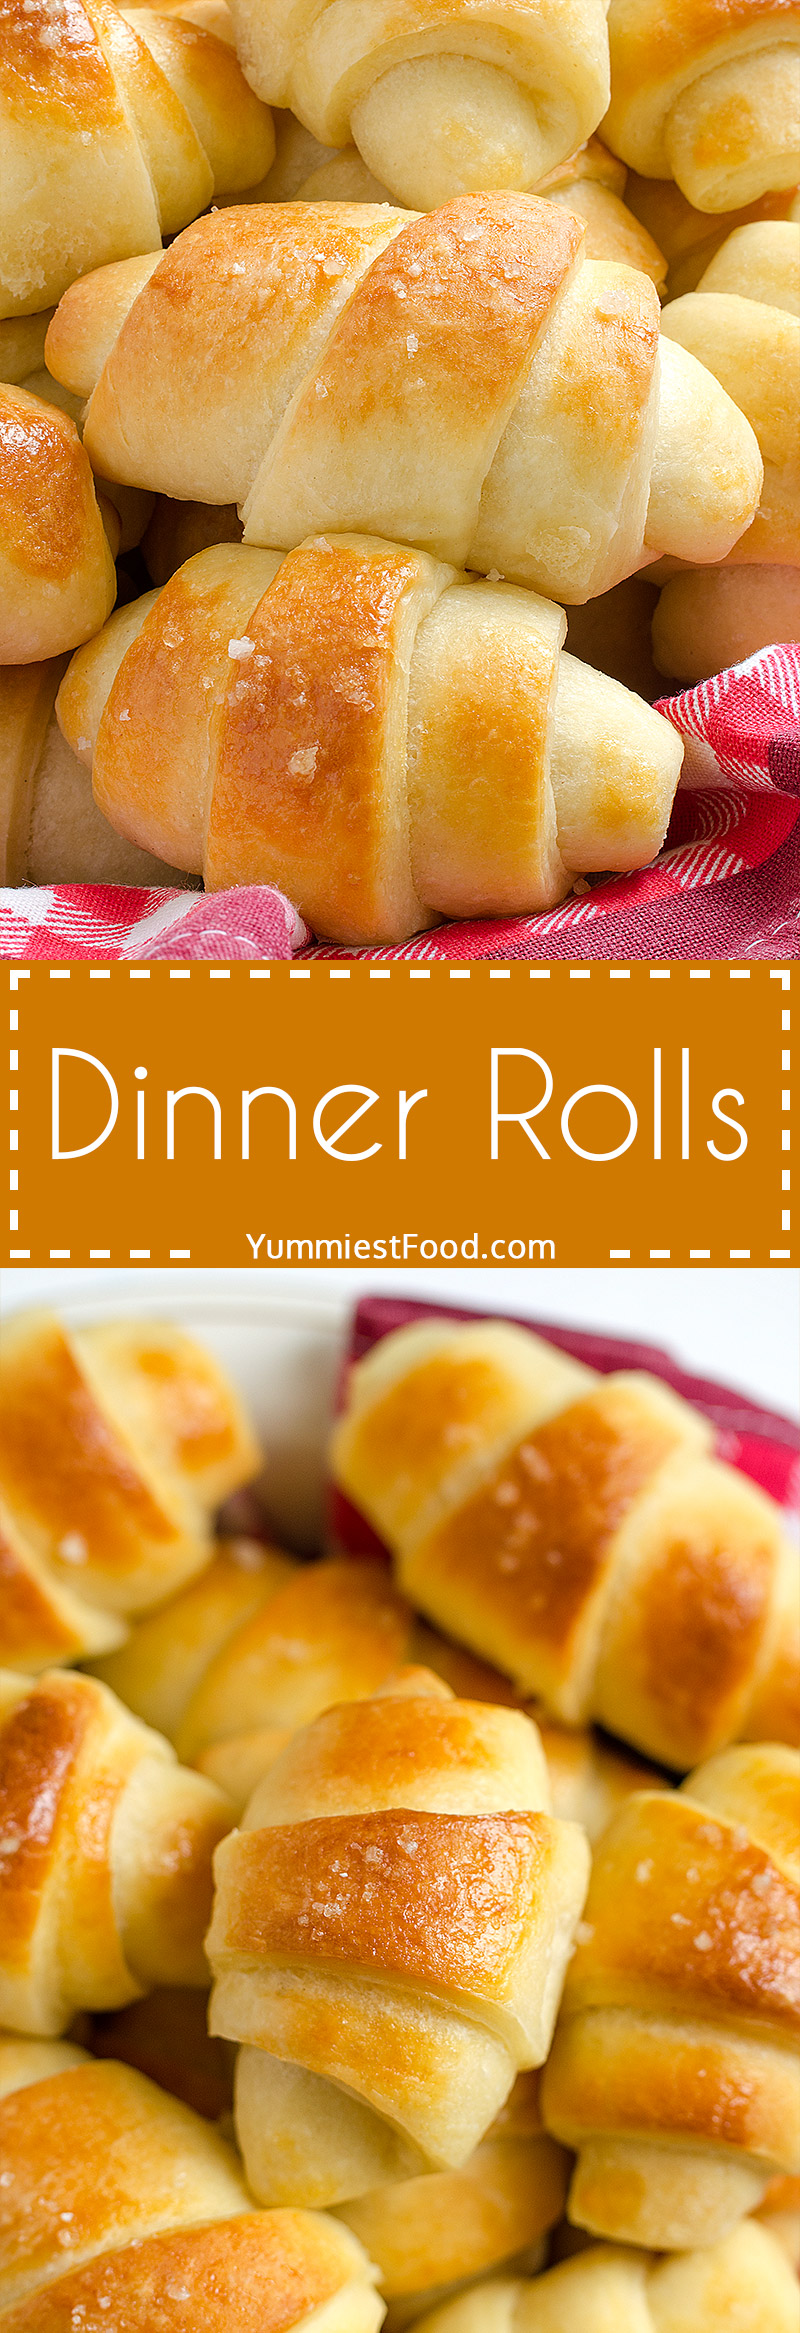 Dinner Rolls - delicious, light, soft and warm! This recipe has been a favorite recipe for years.